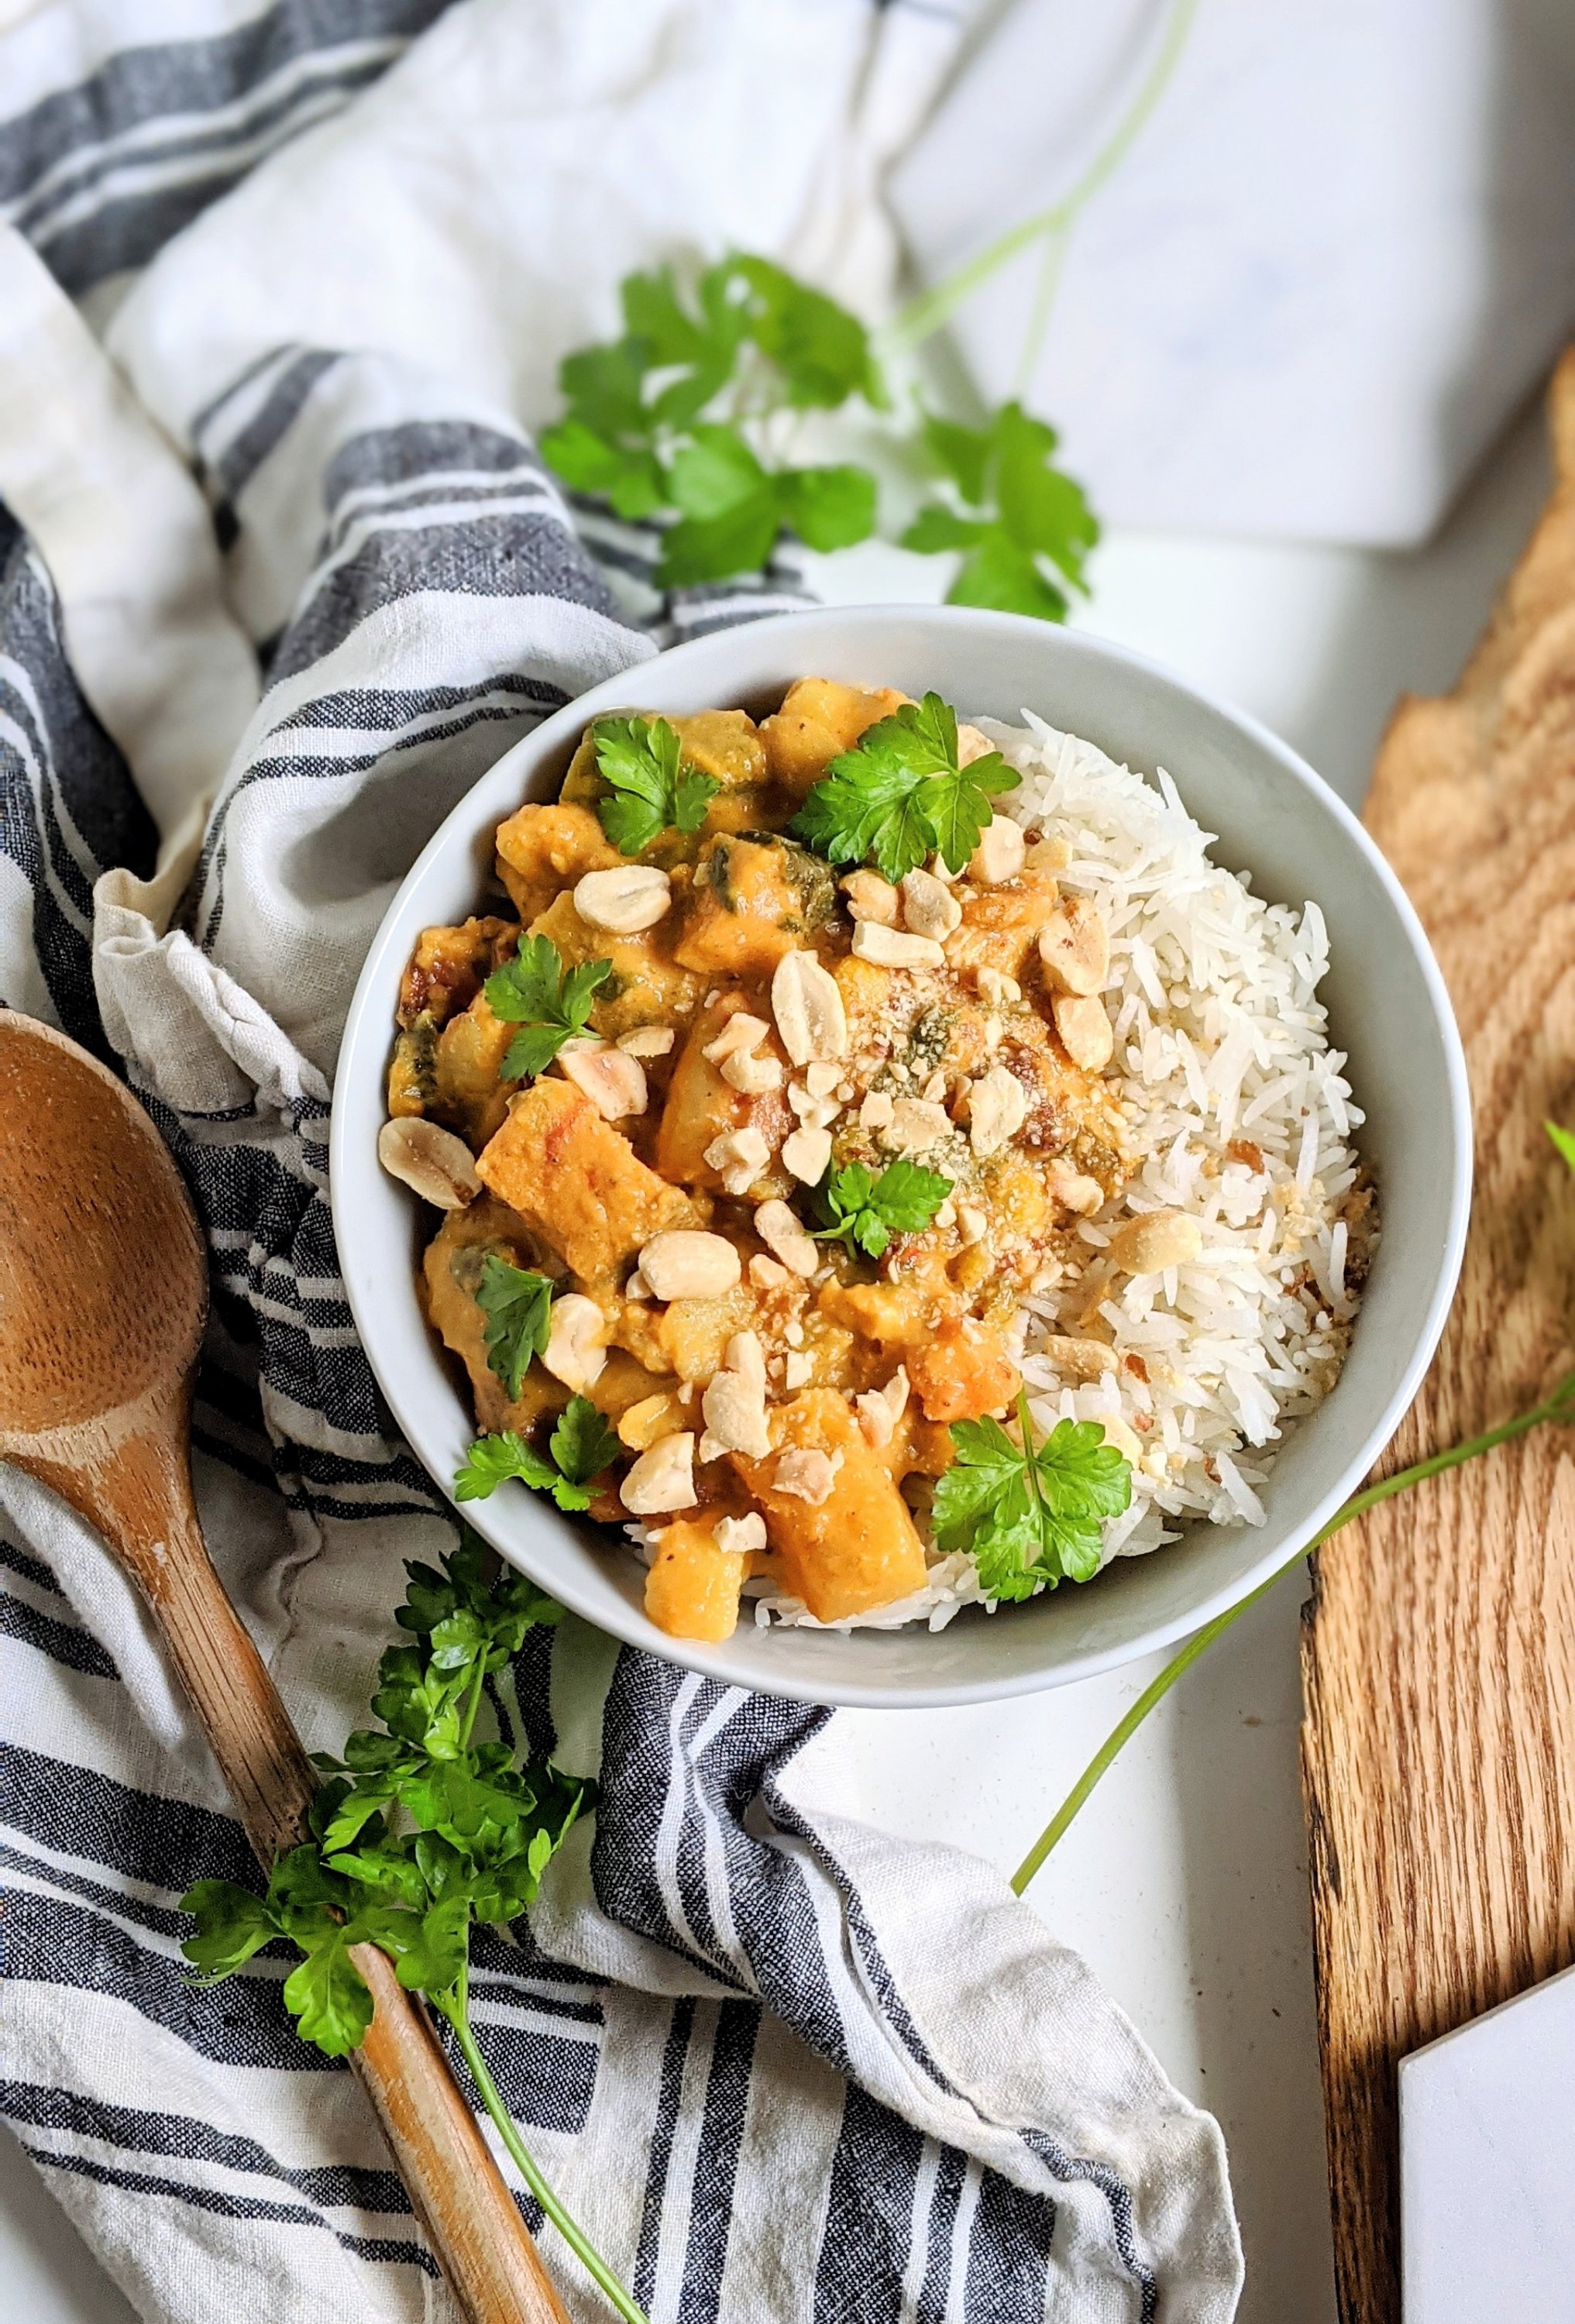 add peanuts to curry recipes healthy paleo sweet potato recipes gluten free vegan veganuary recipes for dinner lunch supper whole30 recipe 30 minute curries